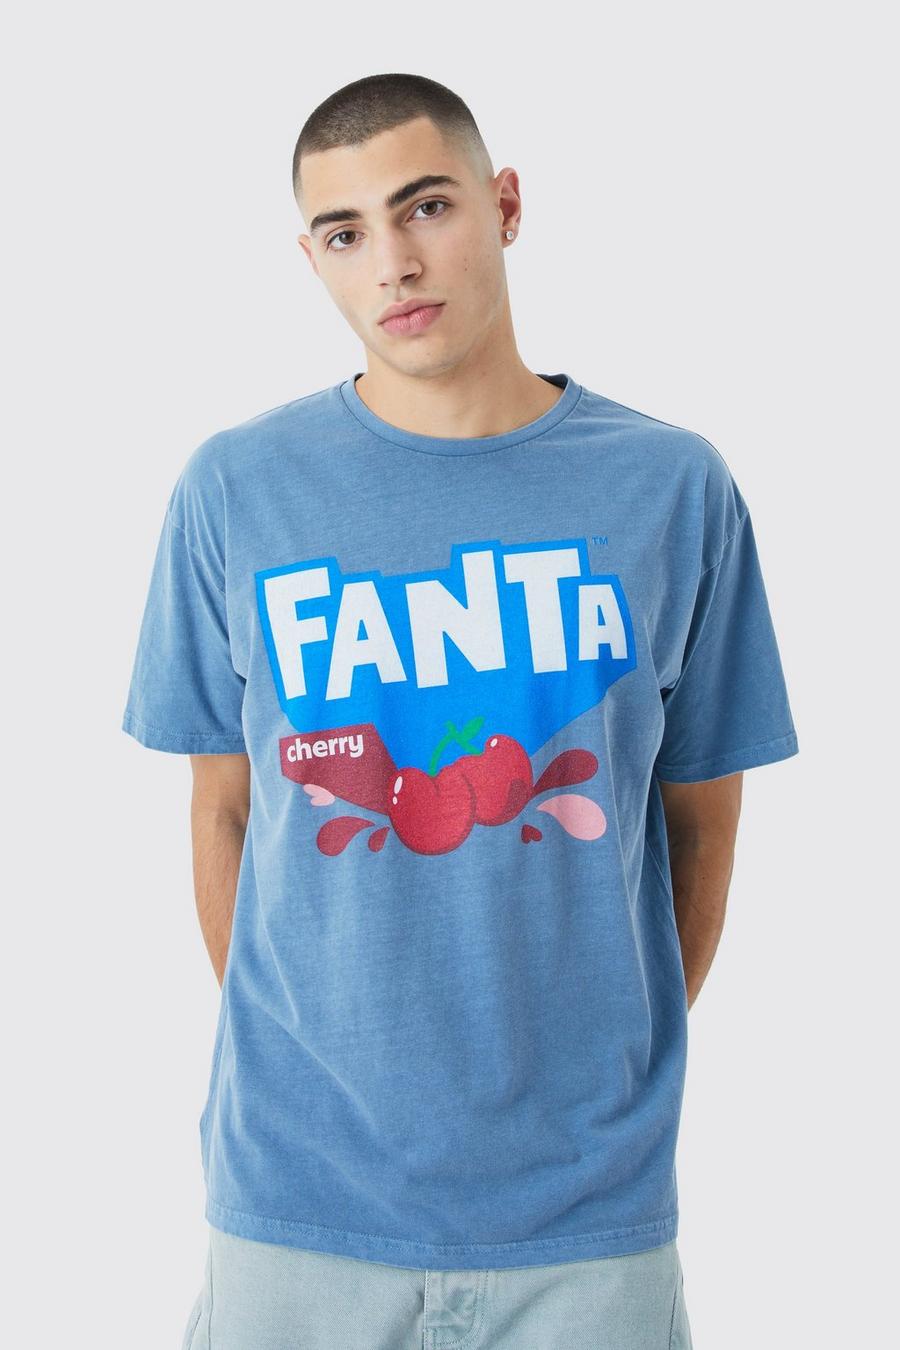 T-shirt oversize ufficiale Fanta in lavaggio ciliegia, Navy image number 1